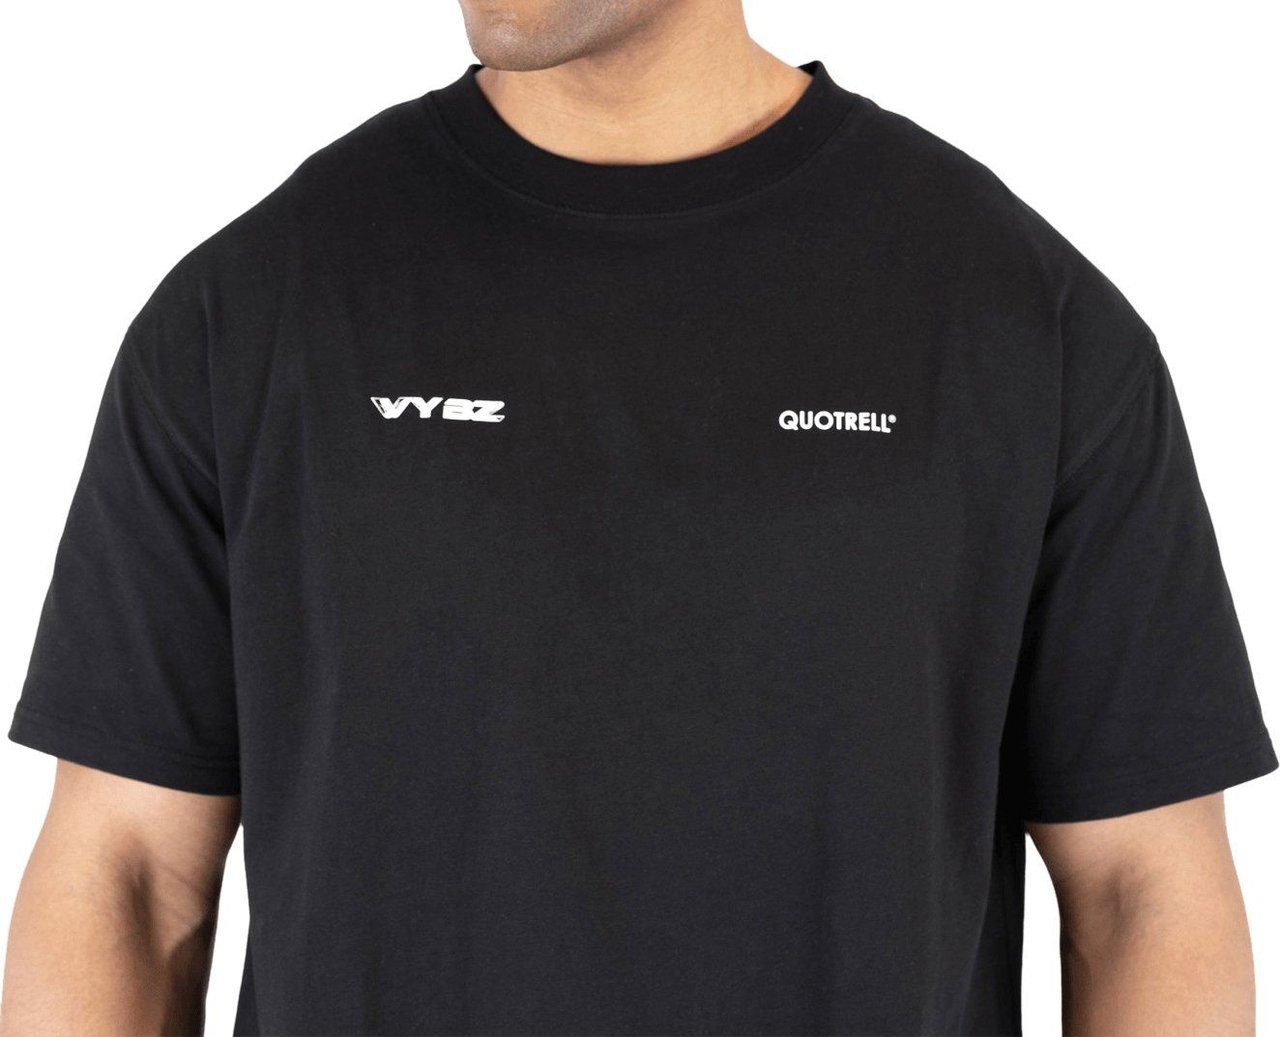 Quotrell Quotrell Couture - Vybz X Quotrell T-shirt | Black/white Zwart